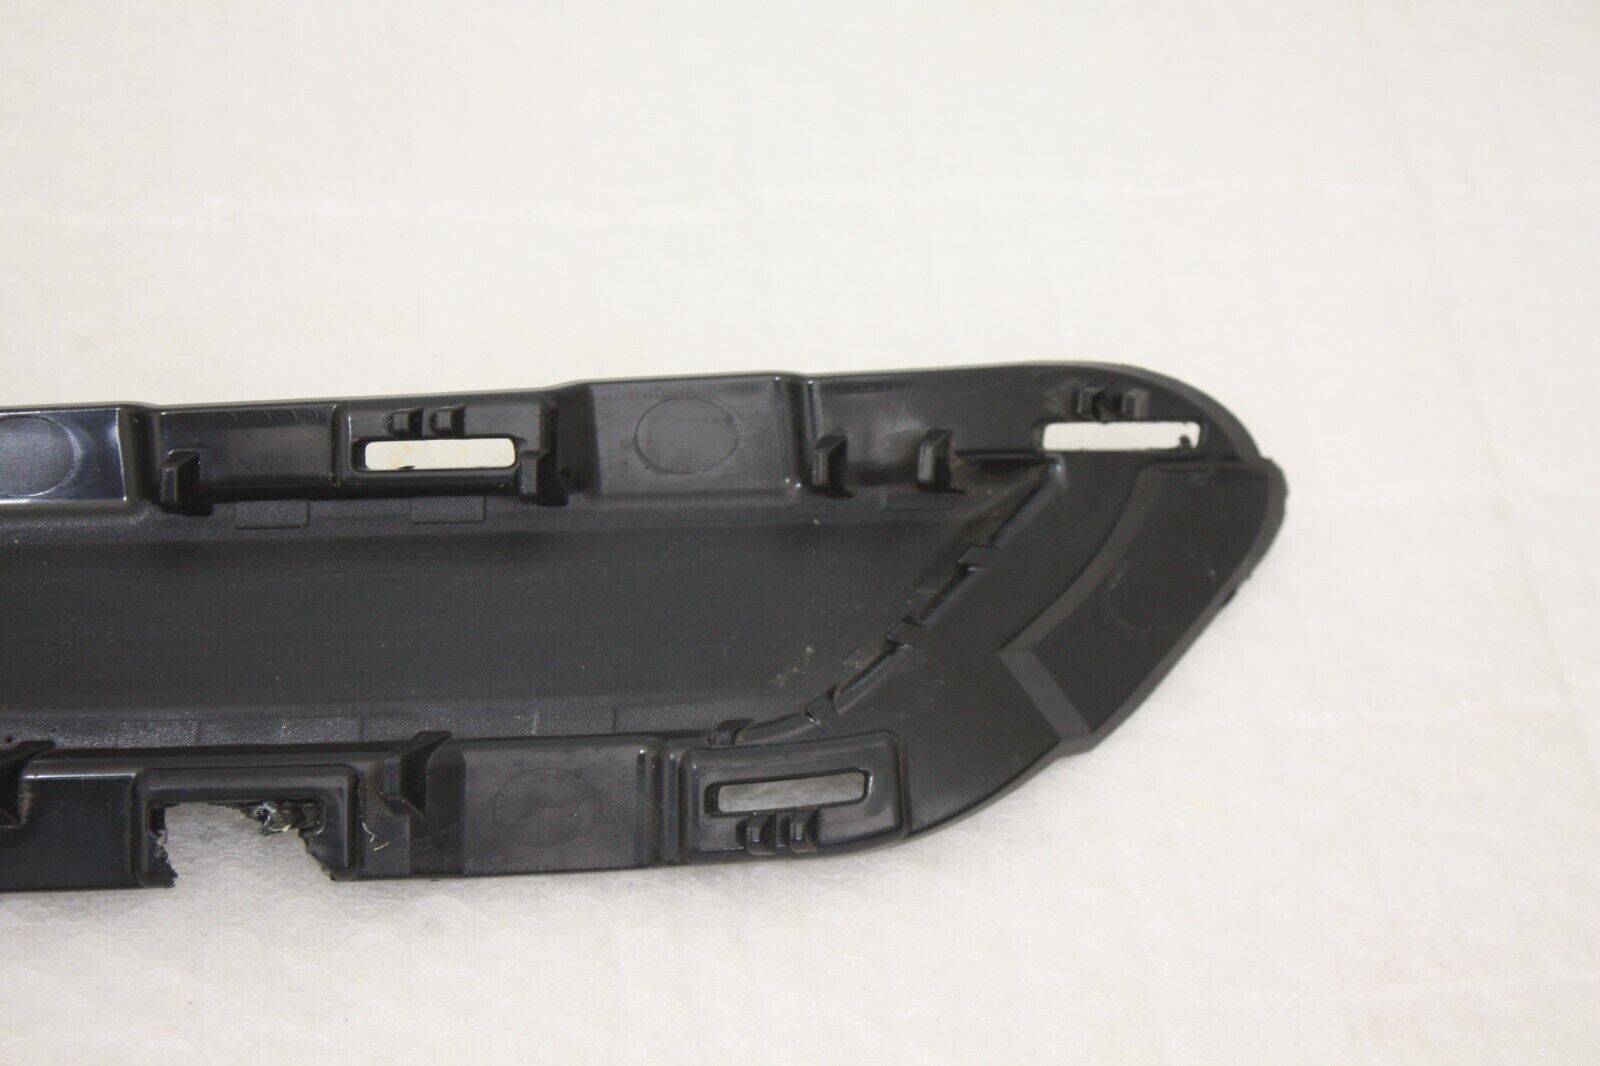 Audi-Q7-Front-Right-End-Cap-Cover-2015-TO-2019-4M0807750A-Genuine-176318342447-2